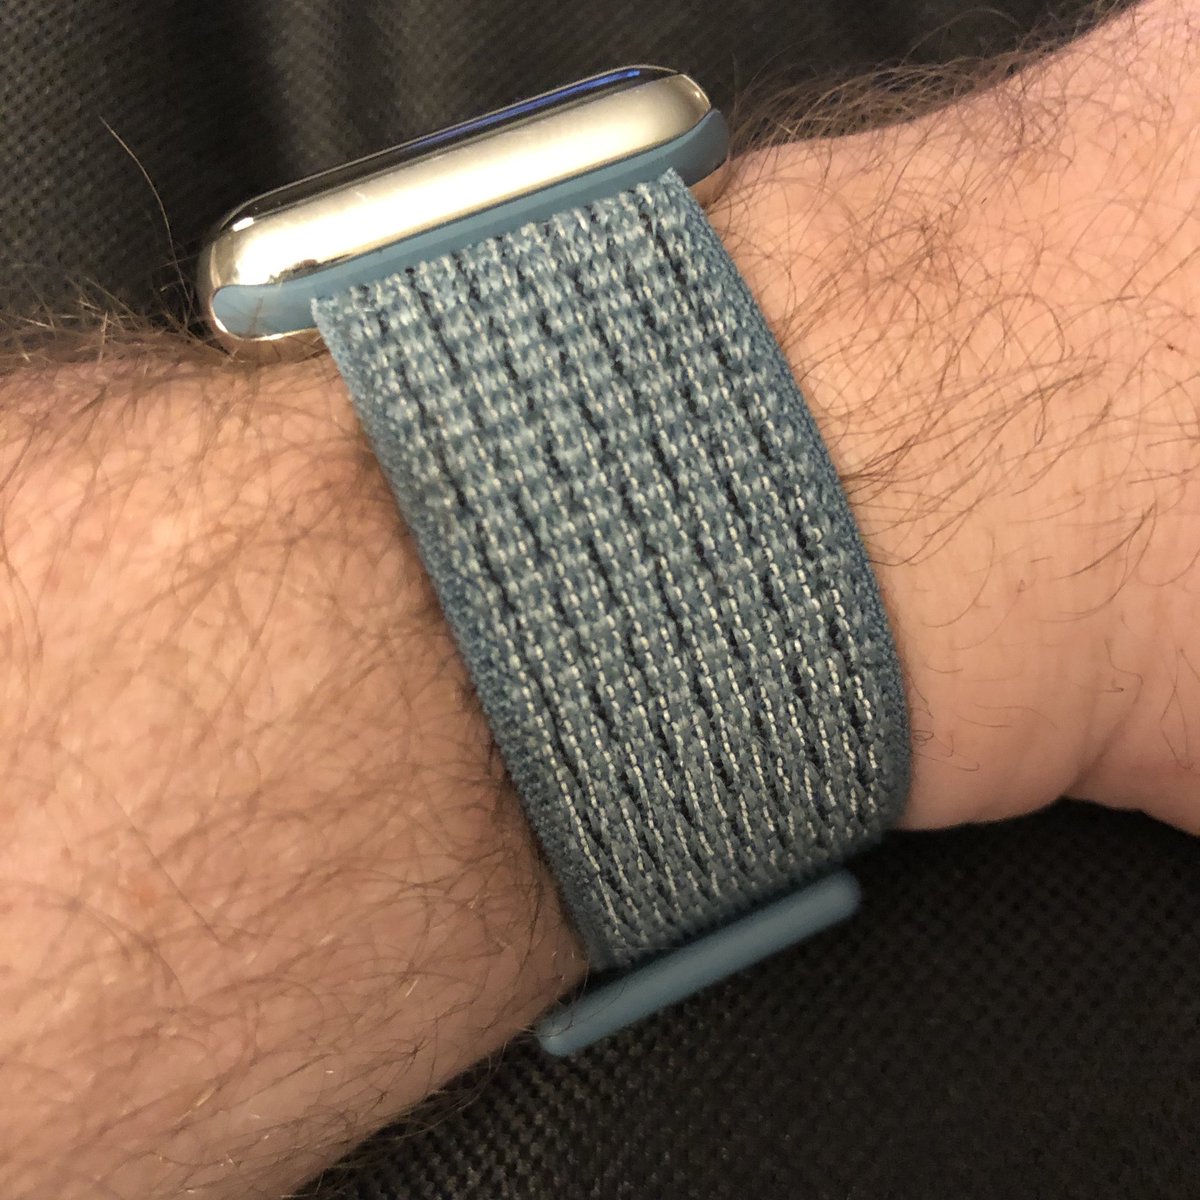 My Apple Watch Band Today on Twitter: "Today - celestial teal @Nike #sportloop #AppleWatch https://t.co/bBJA446zTM" Twitter